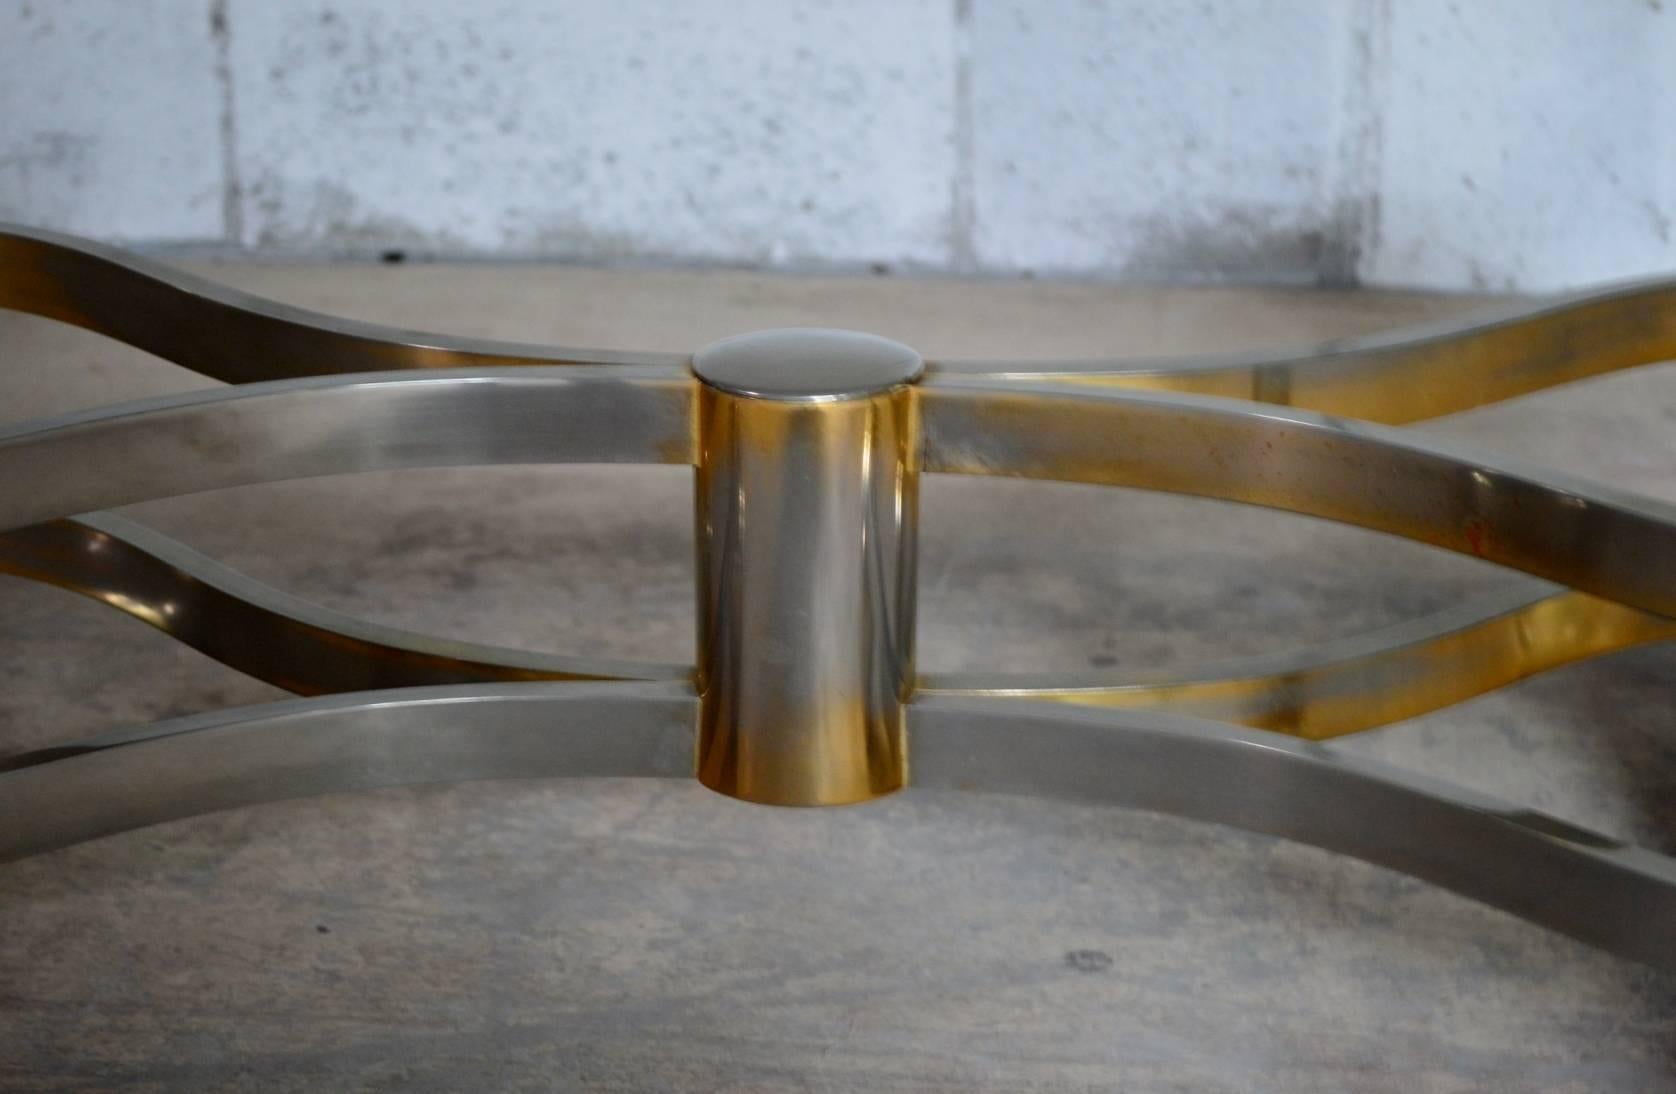 Polished Midcentury Space Age Coffee Table with Brass Finish and Smoke Glass, 1970s